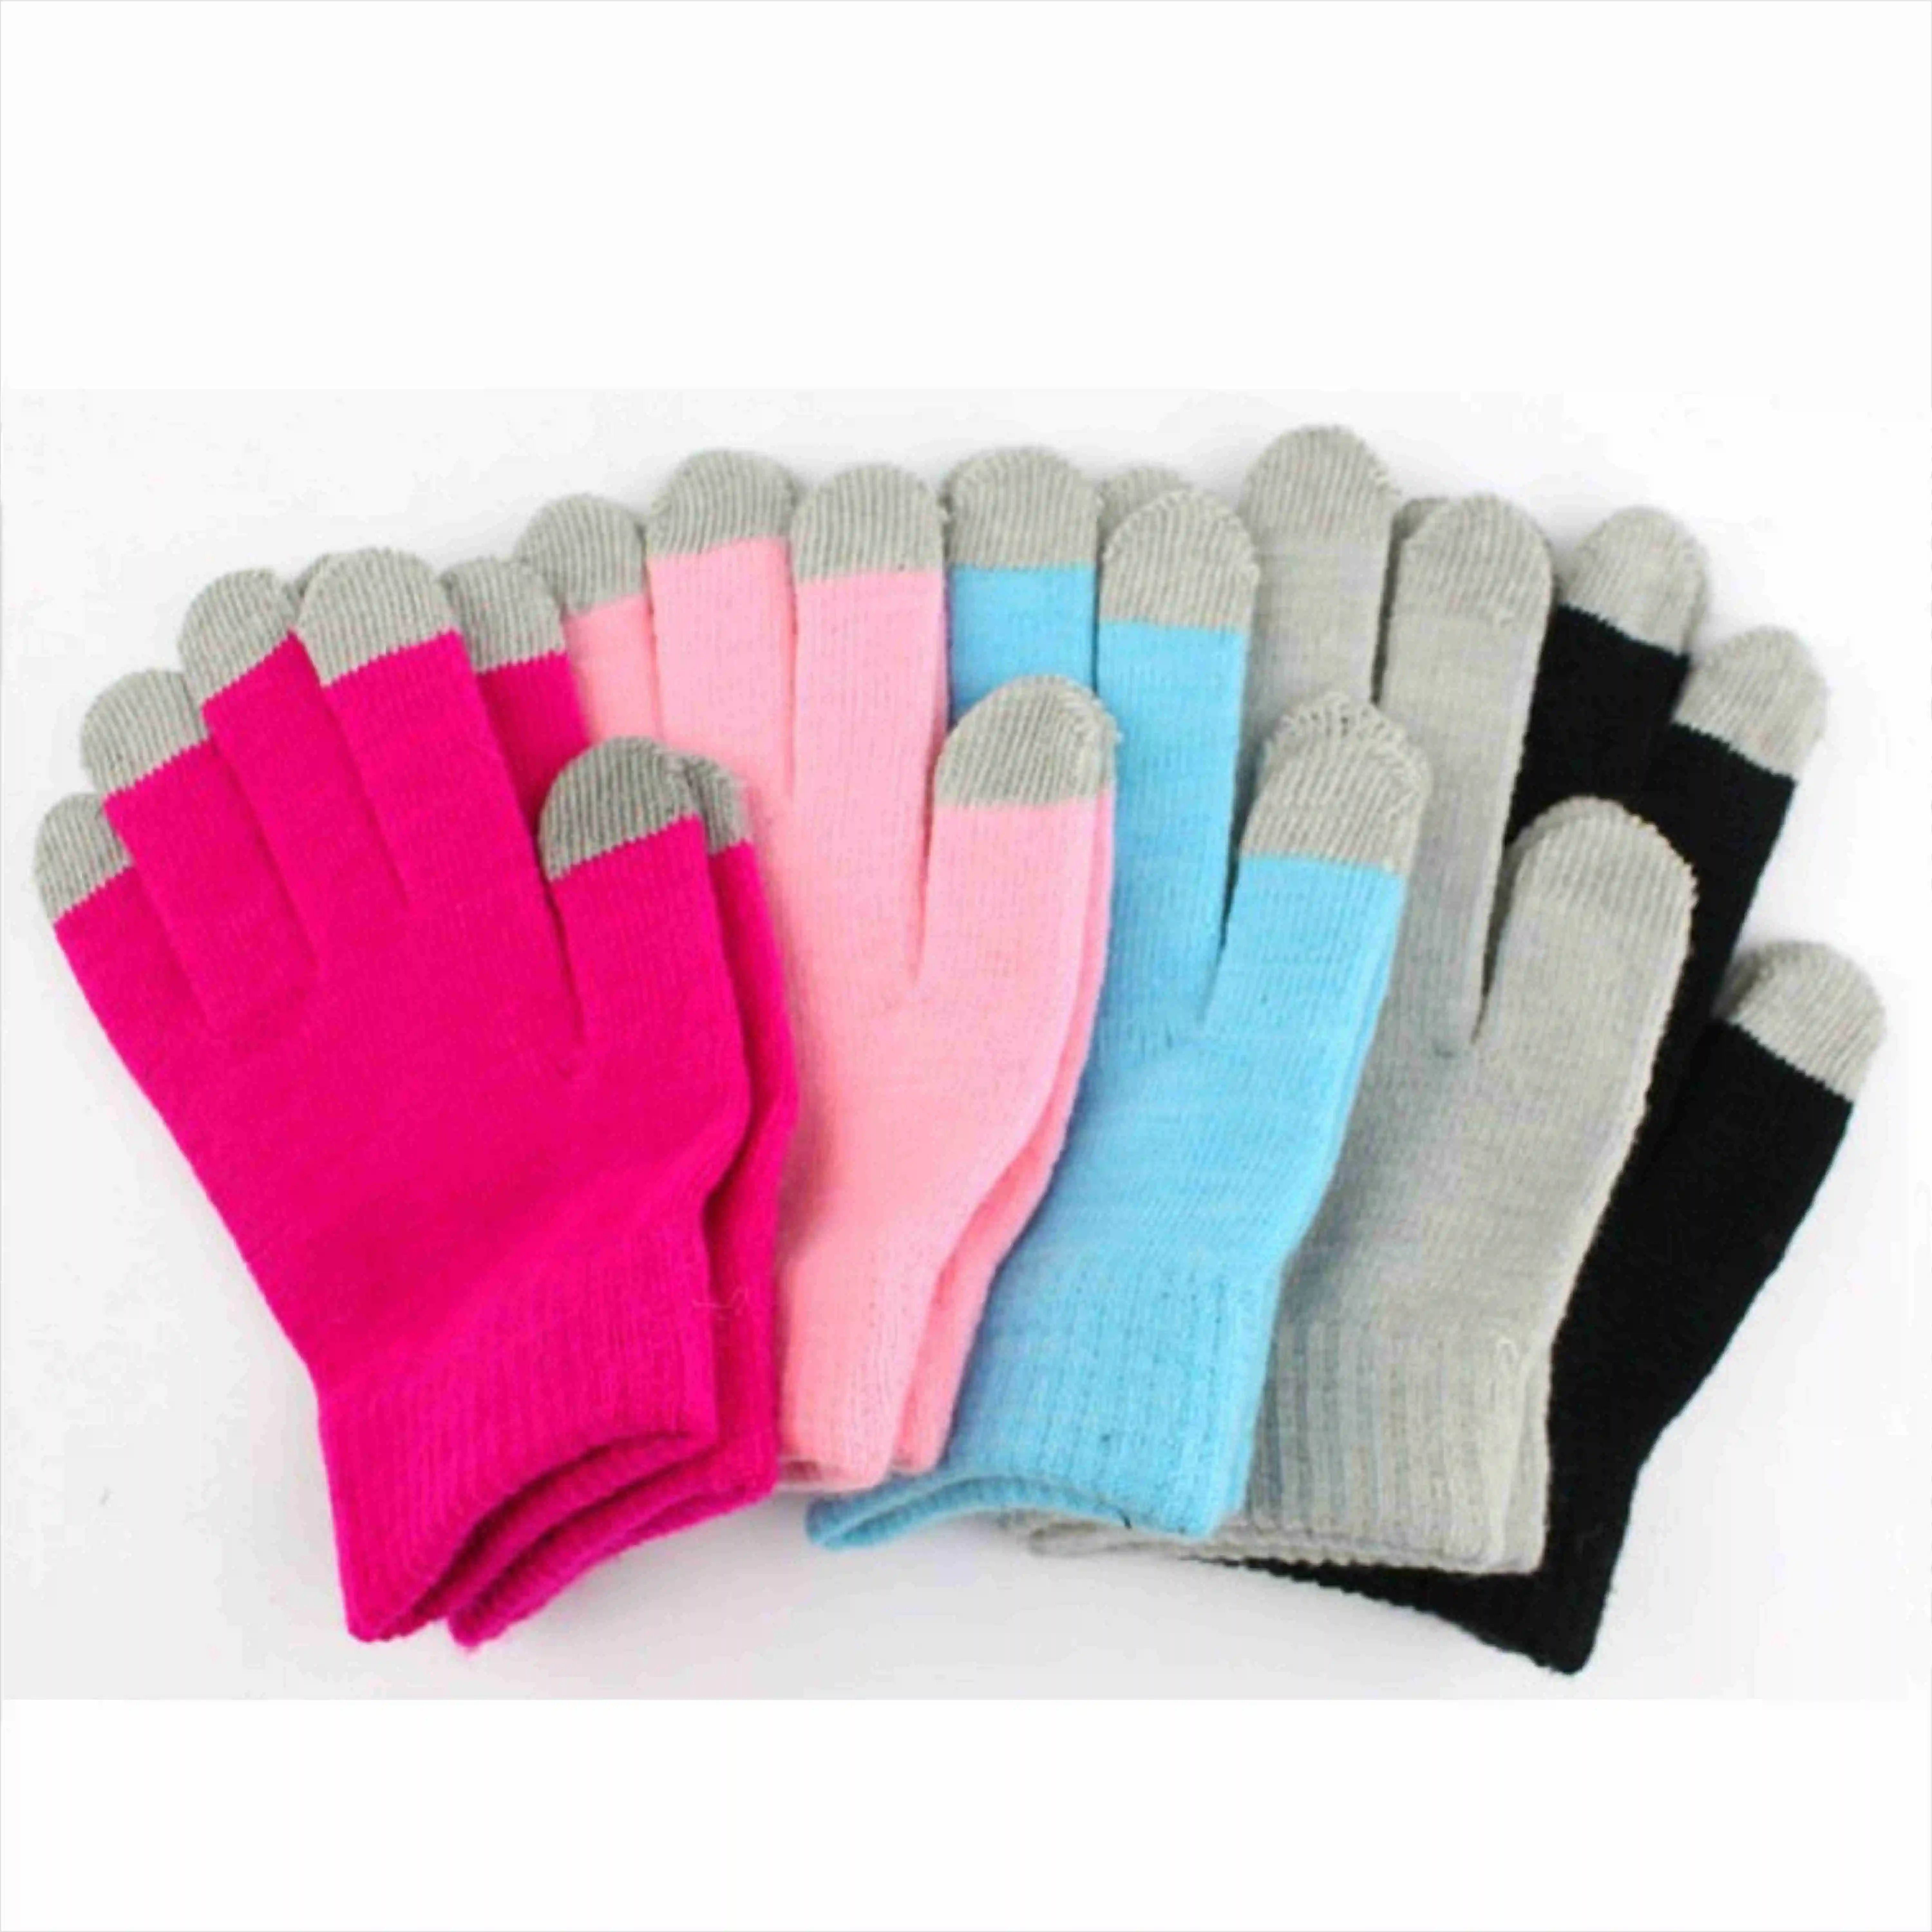 Cheap Unisex Soft Acrylic Knitted Winter Touch Screen Gloves for Smartphones and Tablets